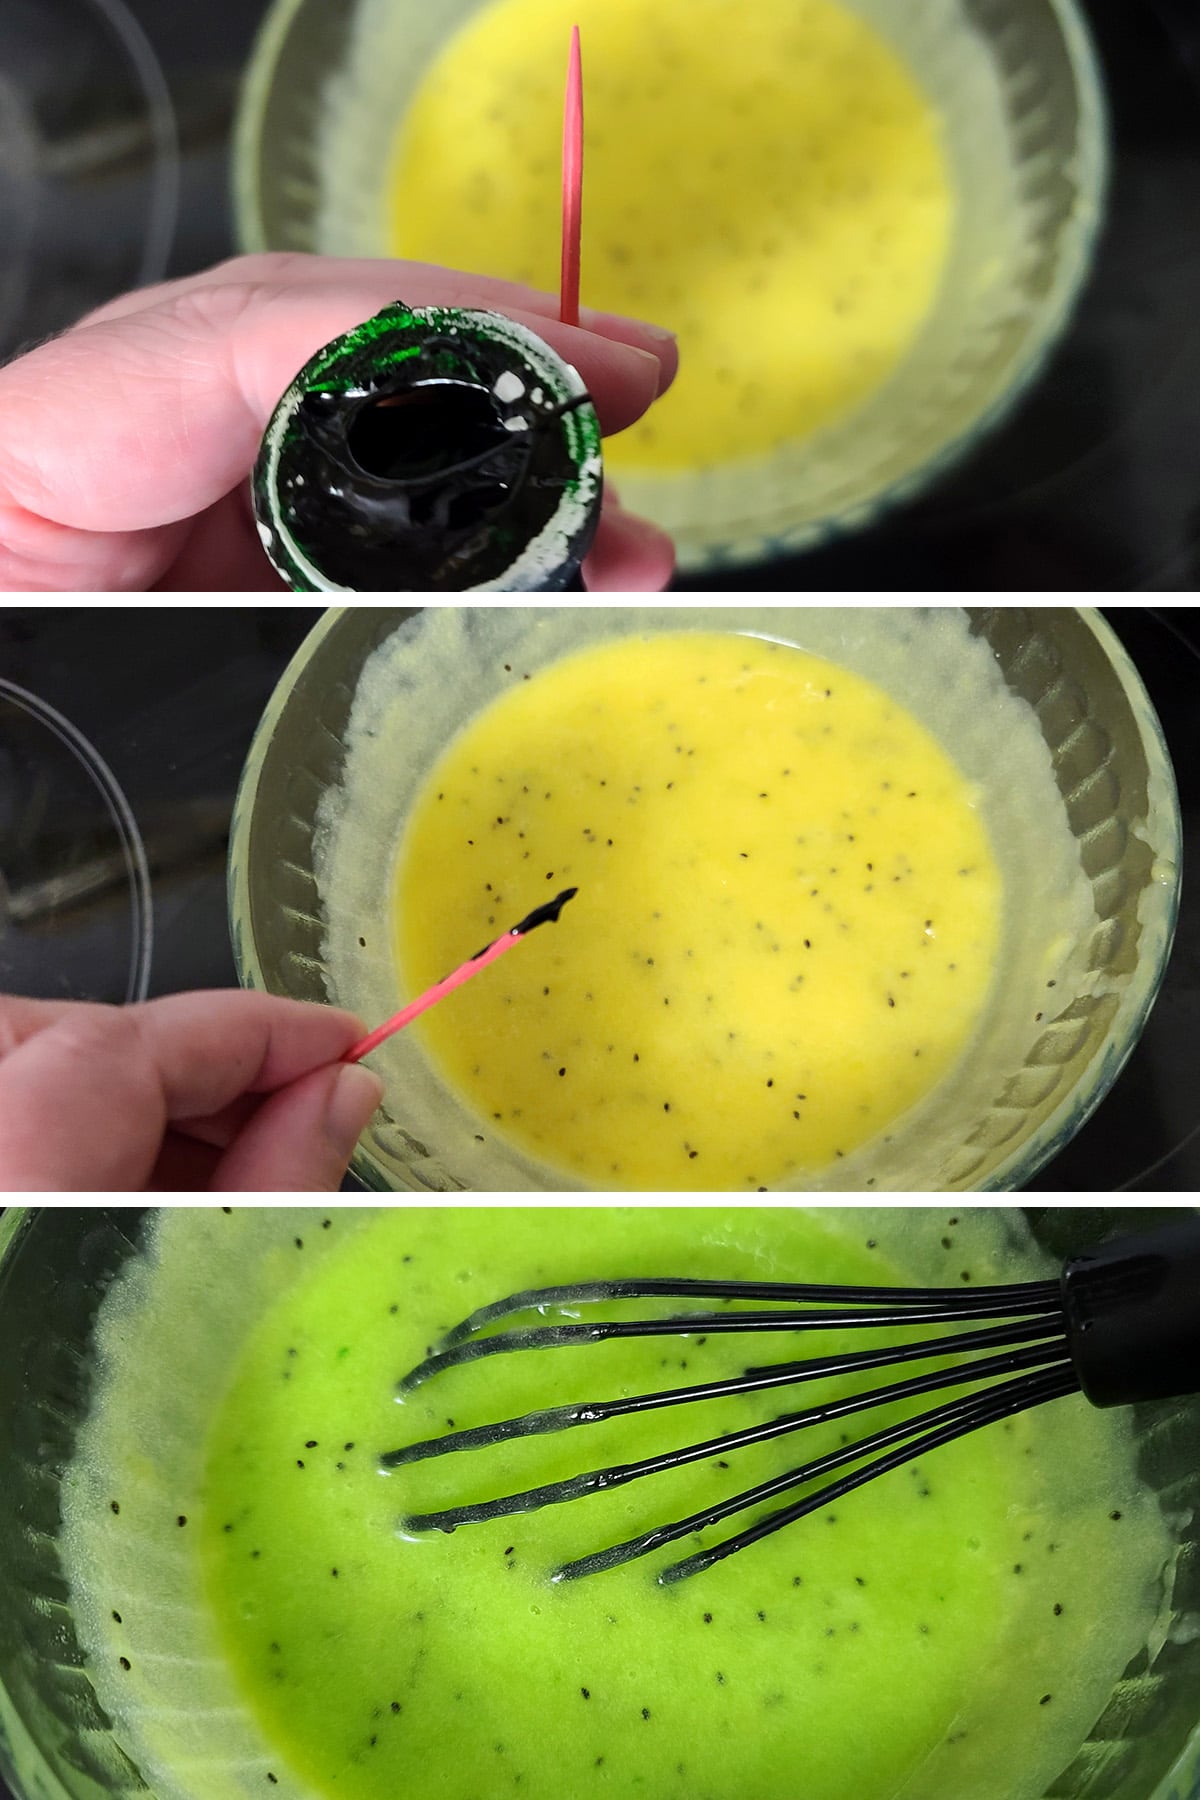 Green food colouring being stirred into the kiwi curd.